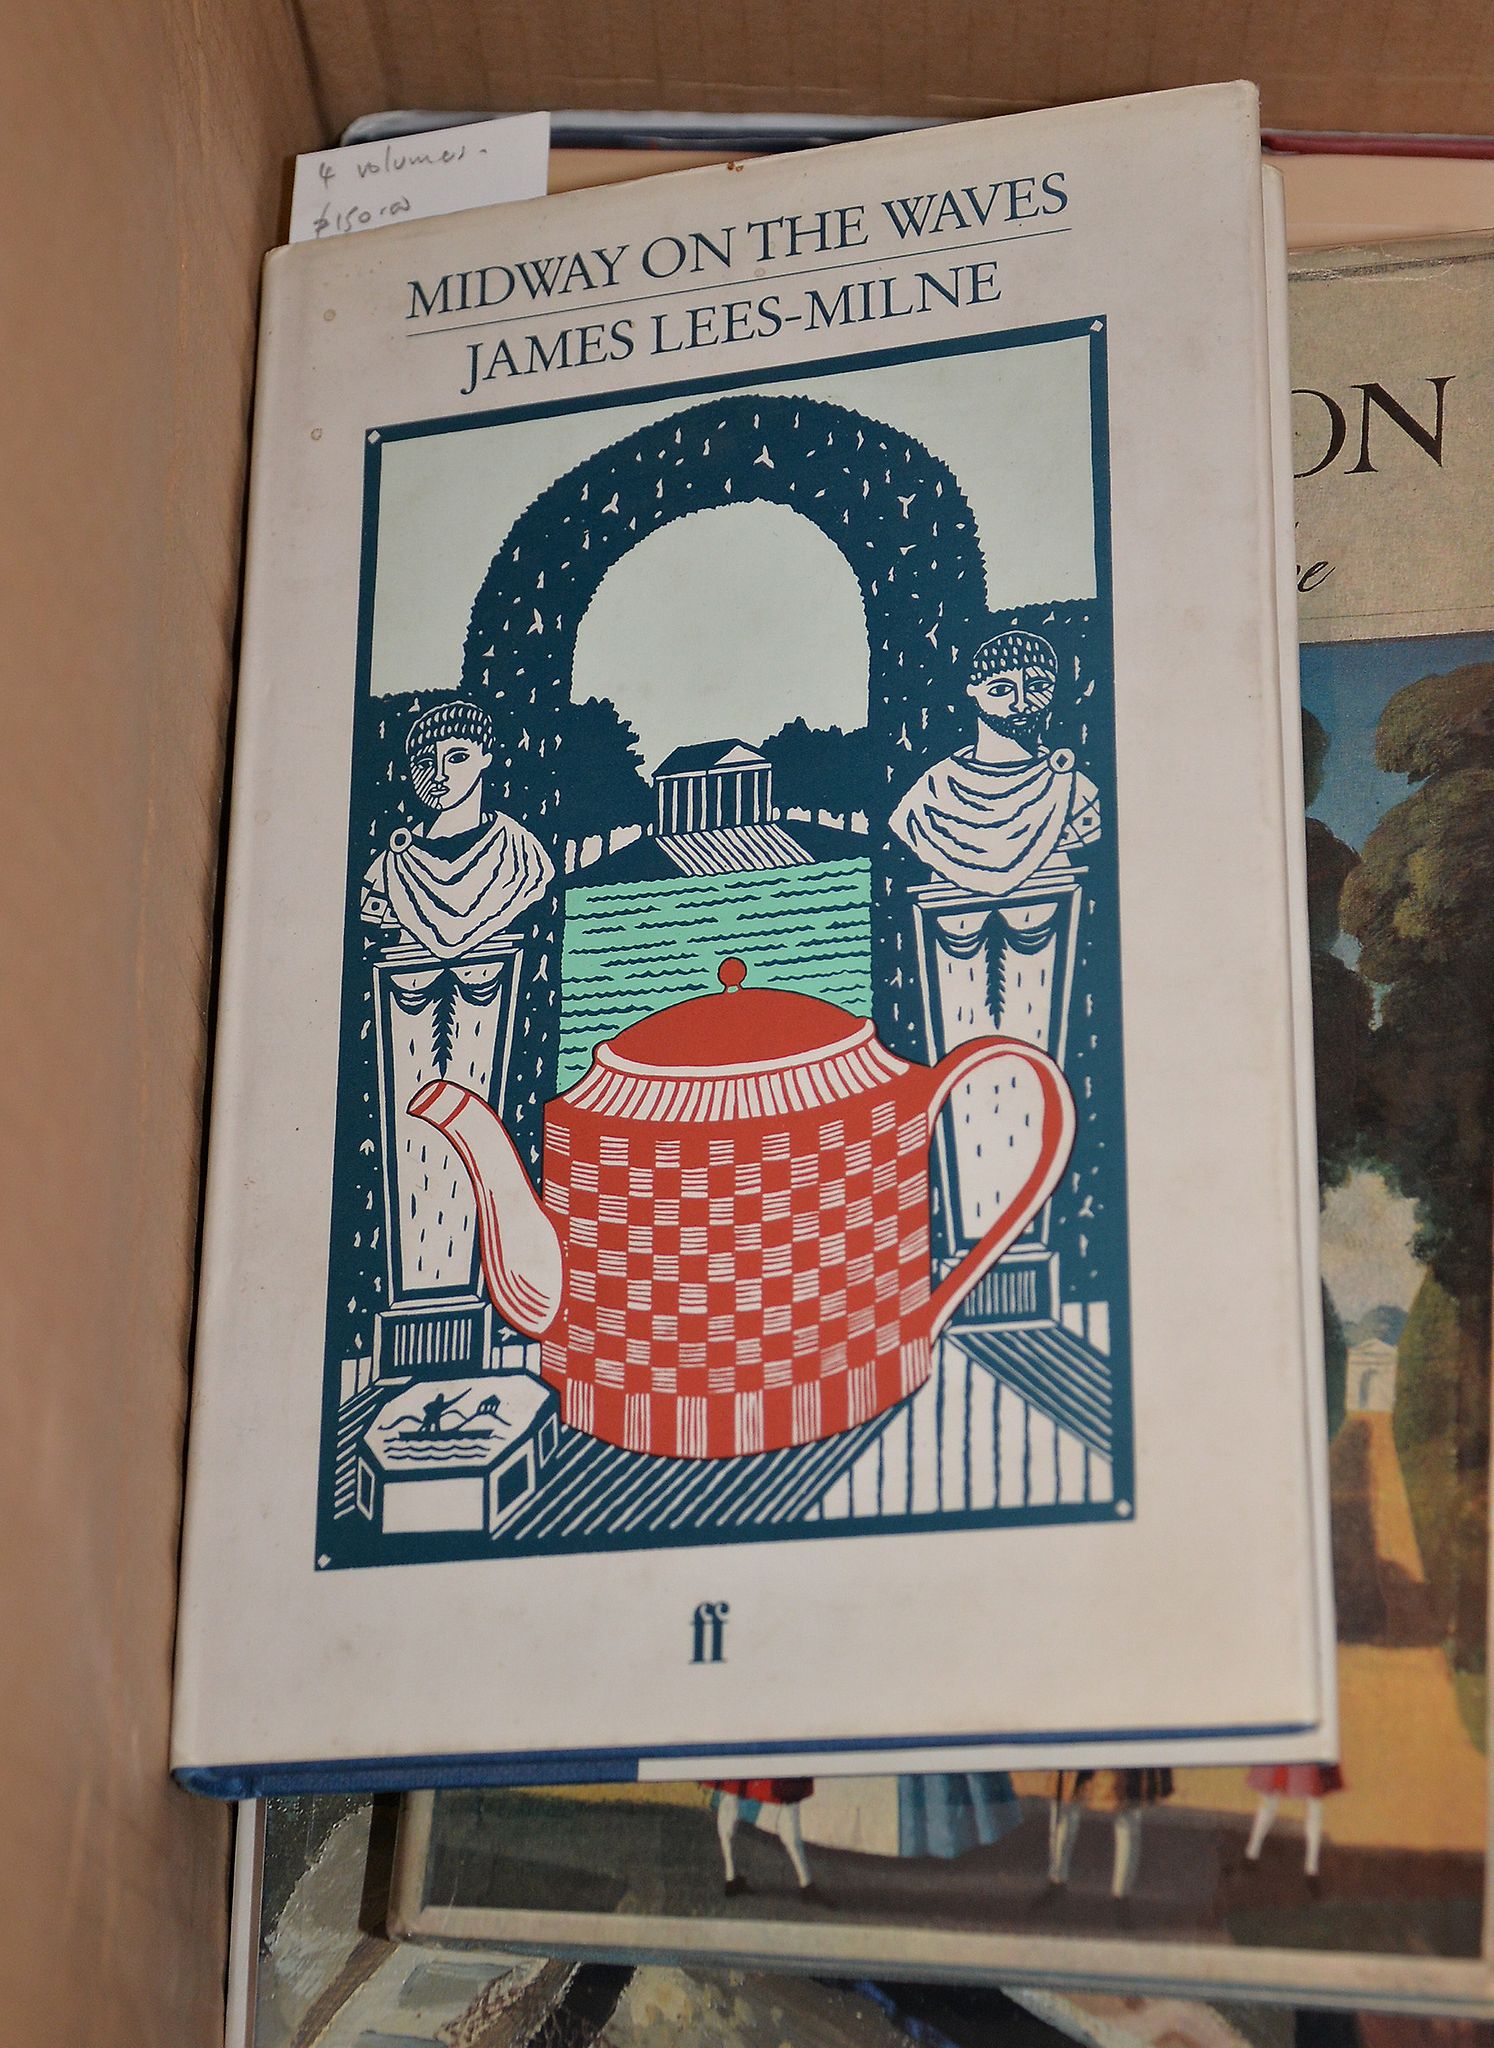 Lees-Milne (James) MIDWAY ON THE WAVES, 4 vols., other work by the same author together with others,